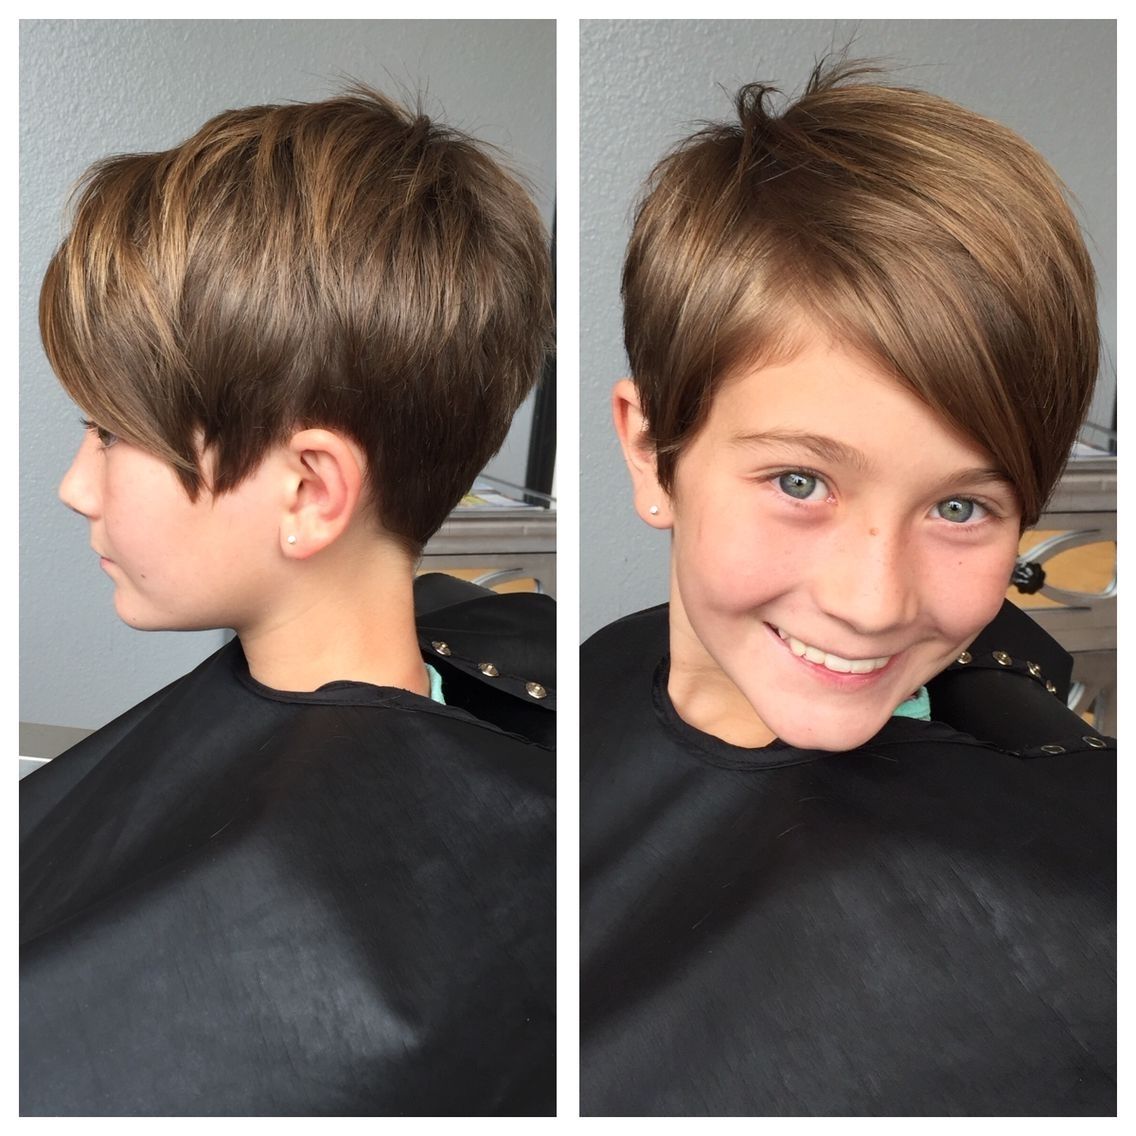 Kids Pixie Haircut | Hair | Pinterest | Pixie Haircut, Pixies And In Best And Newest Short Pixie Hairstyles For Little Girls (View 3 of 15)